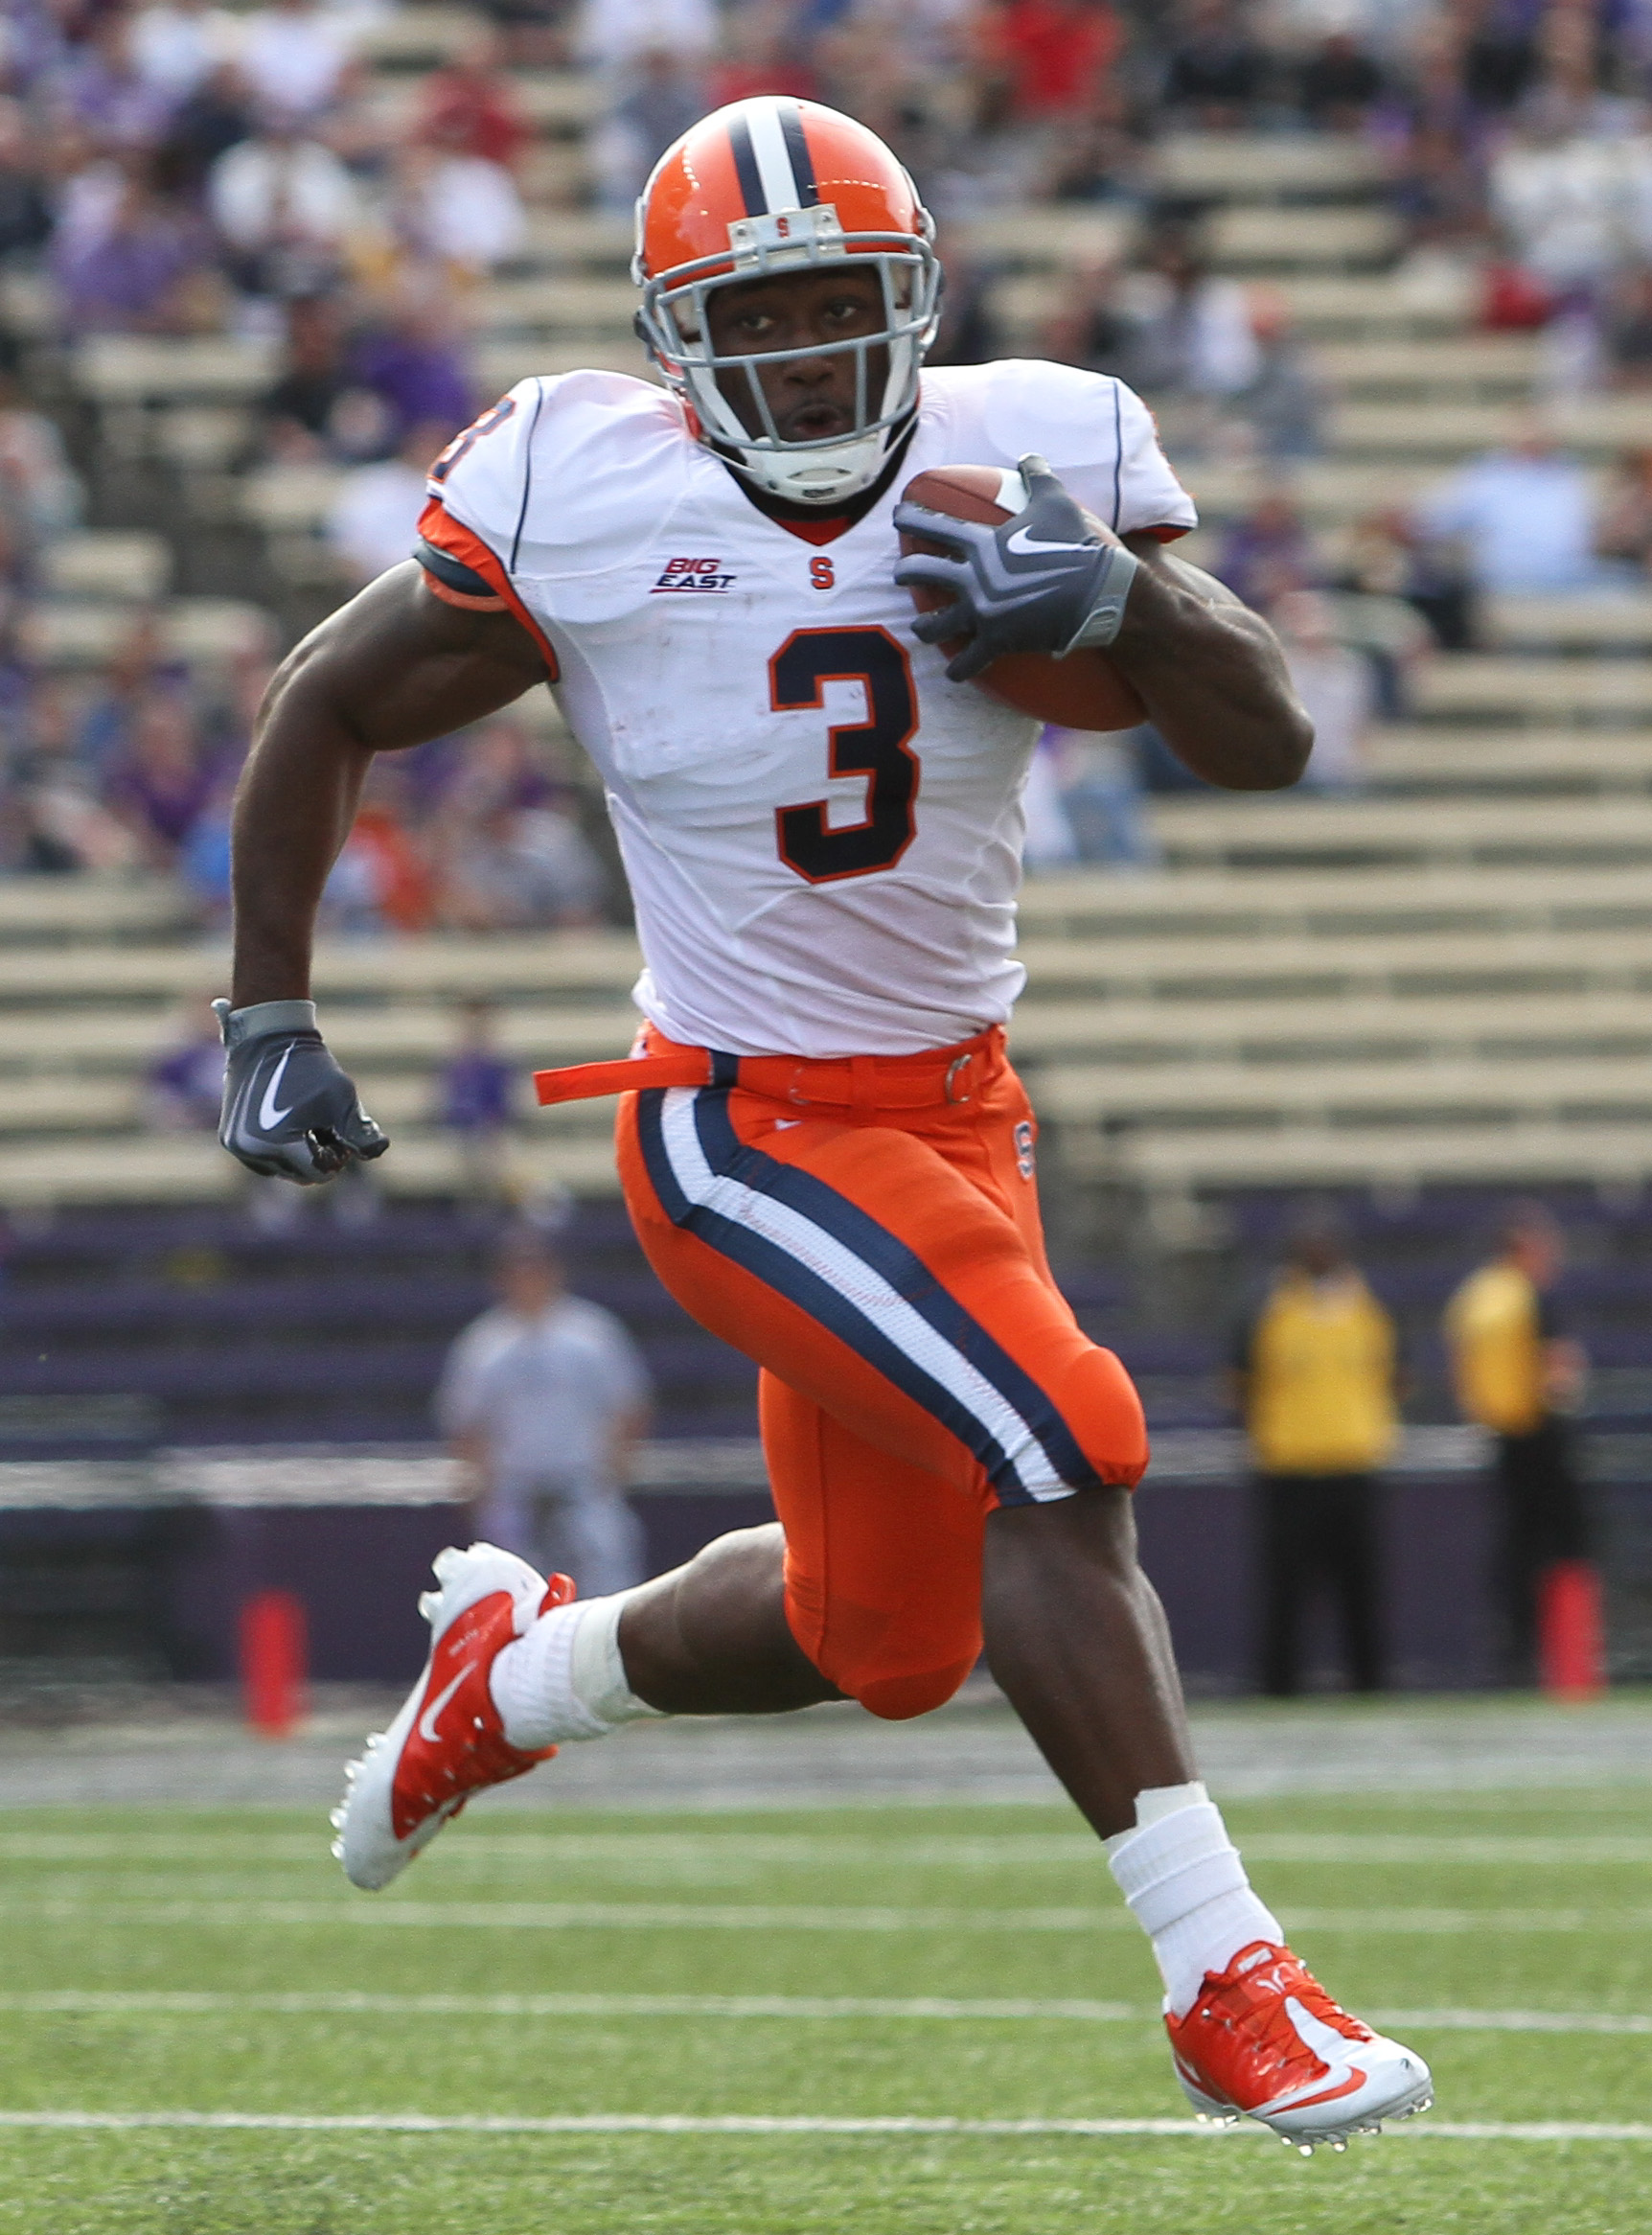 SEATTLE - SEPTEMBER 11:  Running back Delone Carter #3 of the Syracuse Orange rushes against the Washington Huskies on September 11, 2010 at Husky Stadium in Seattle, Washington. (Photo by Otto Greule Jr/Getty Images)